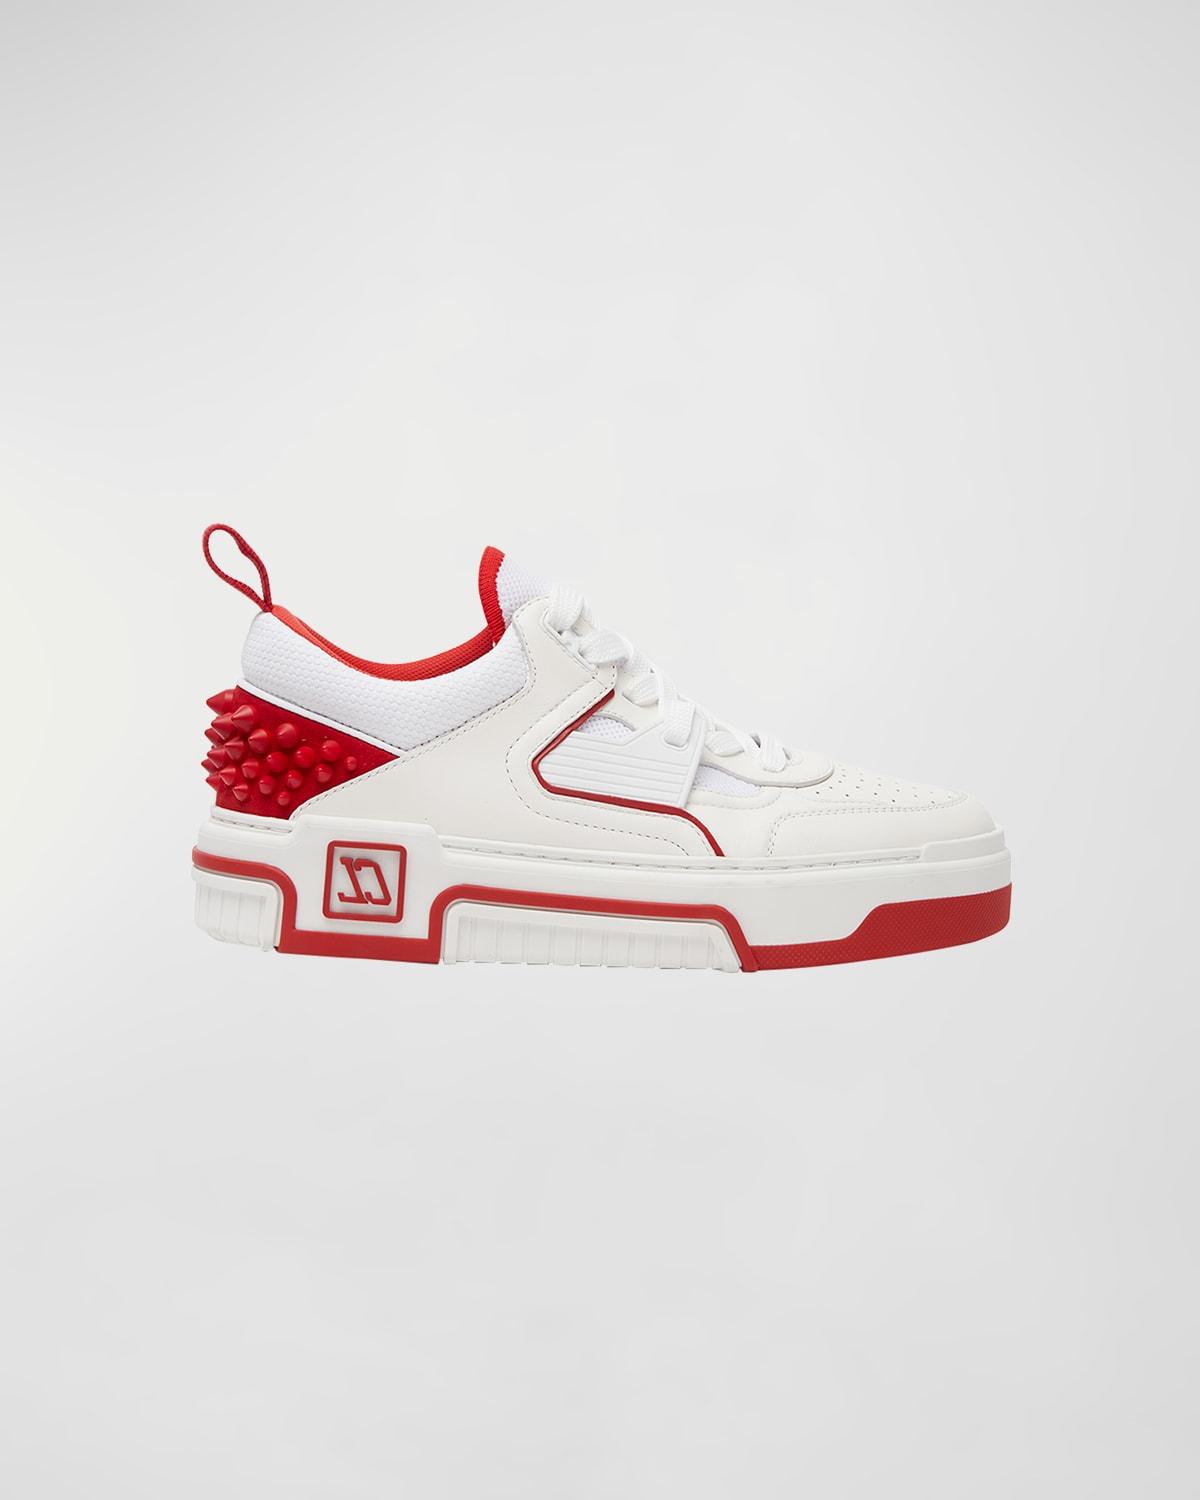 Transplant kant Ristede Christian Louboutin Astroloubi Donna Red Sole Leather Low-top Sneakers |  Lyst